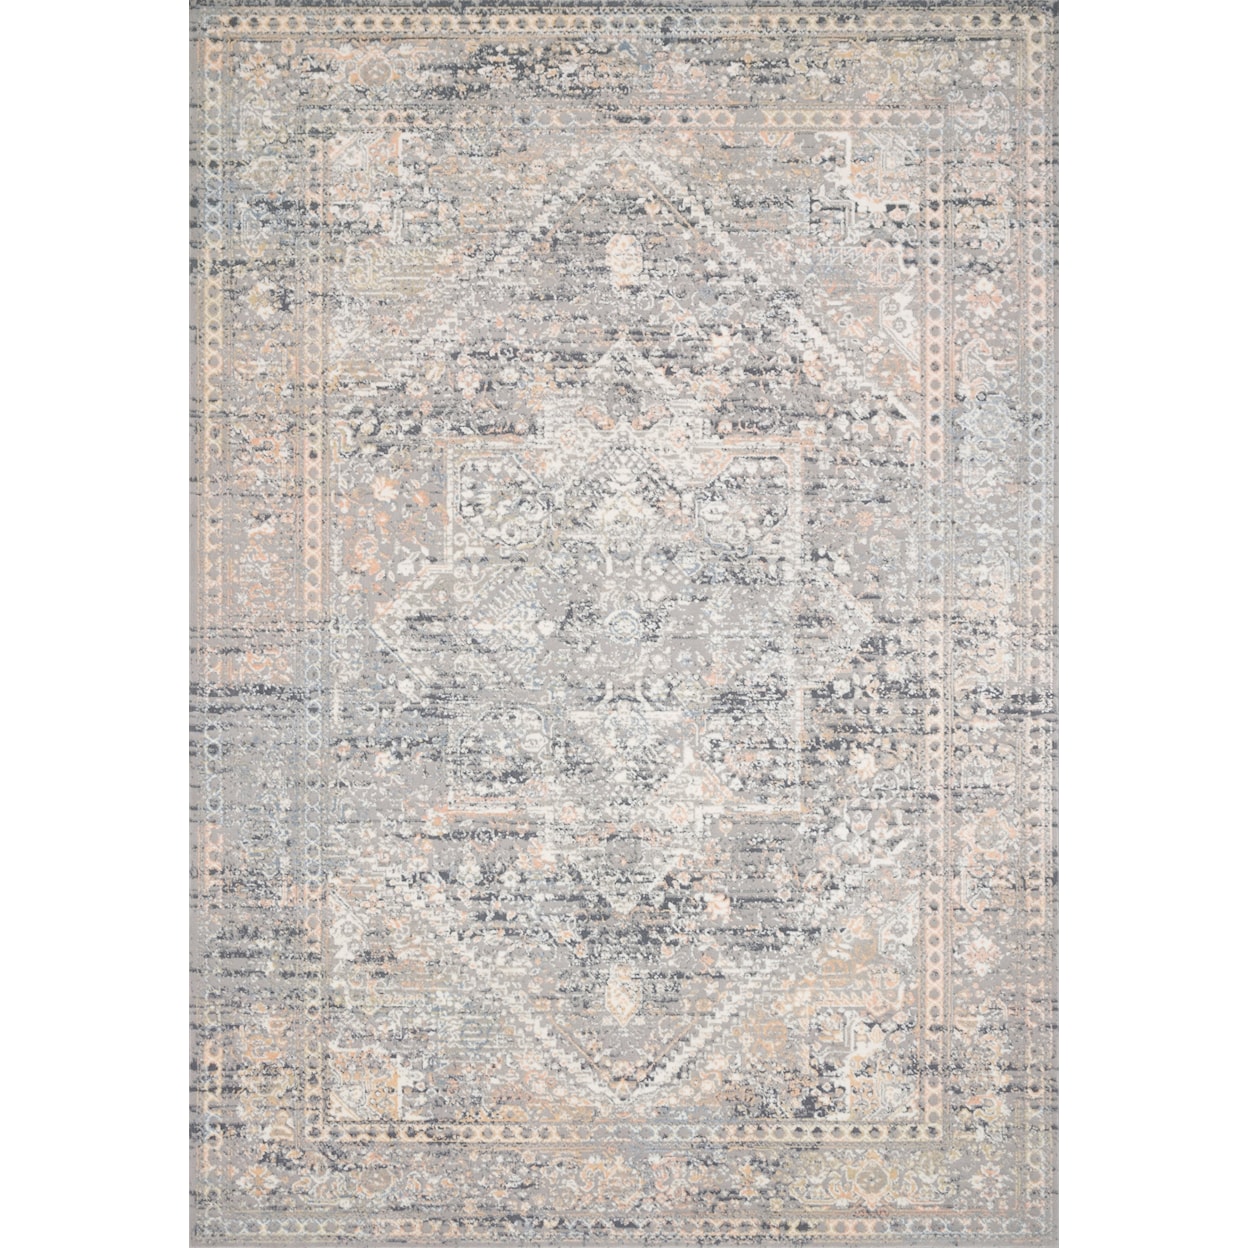 Reeds Rugs Lucia 2'0" x 3'0"  Rug